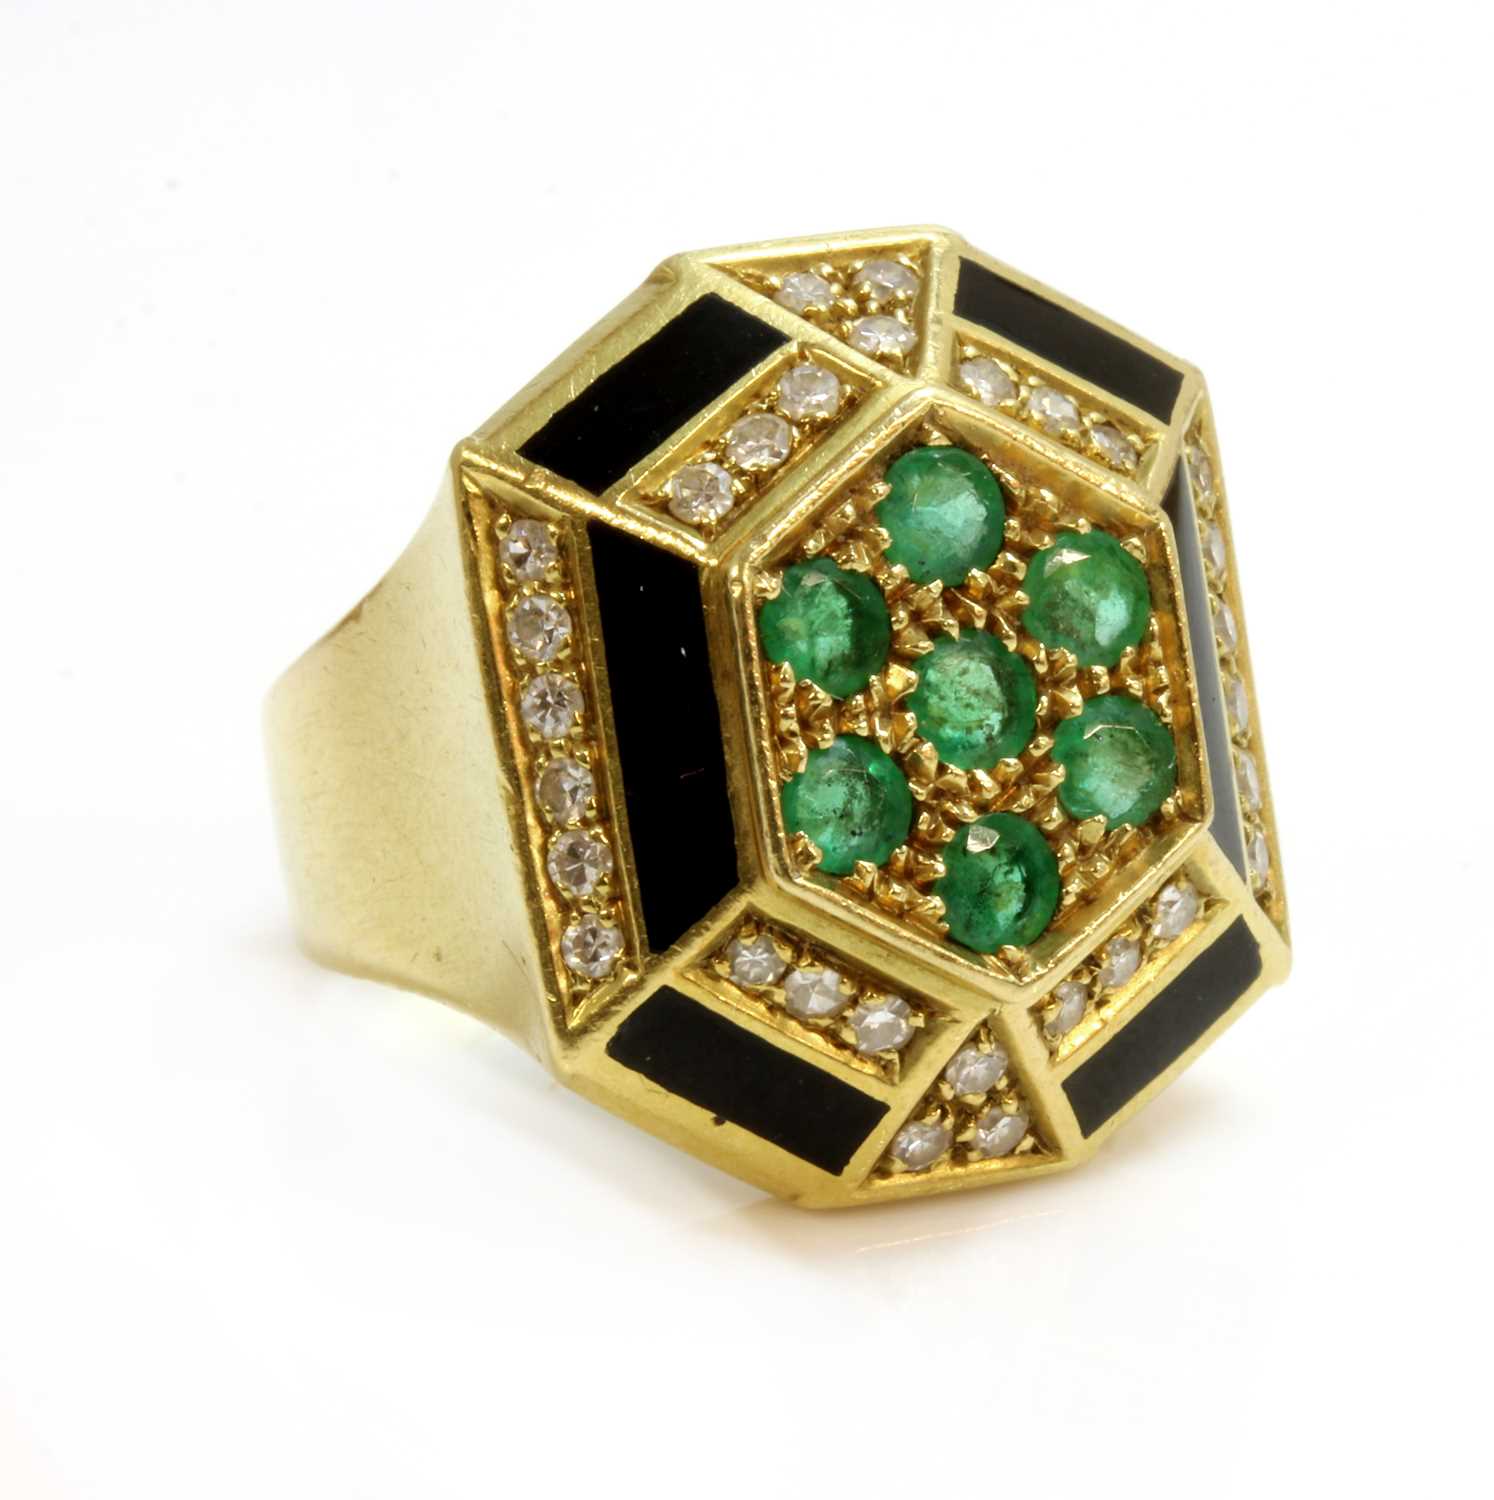 Lot 198 - An Italian emerald, diamond and black enamel ring, with an octagonal domed head, c.1960